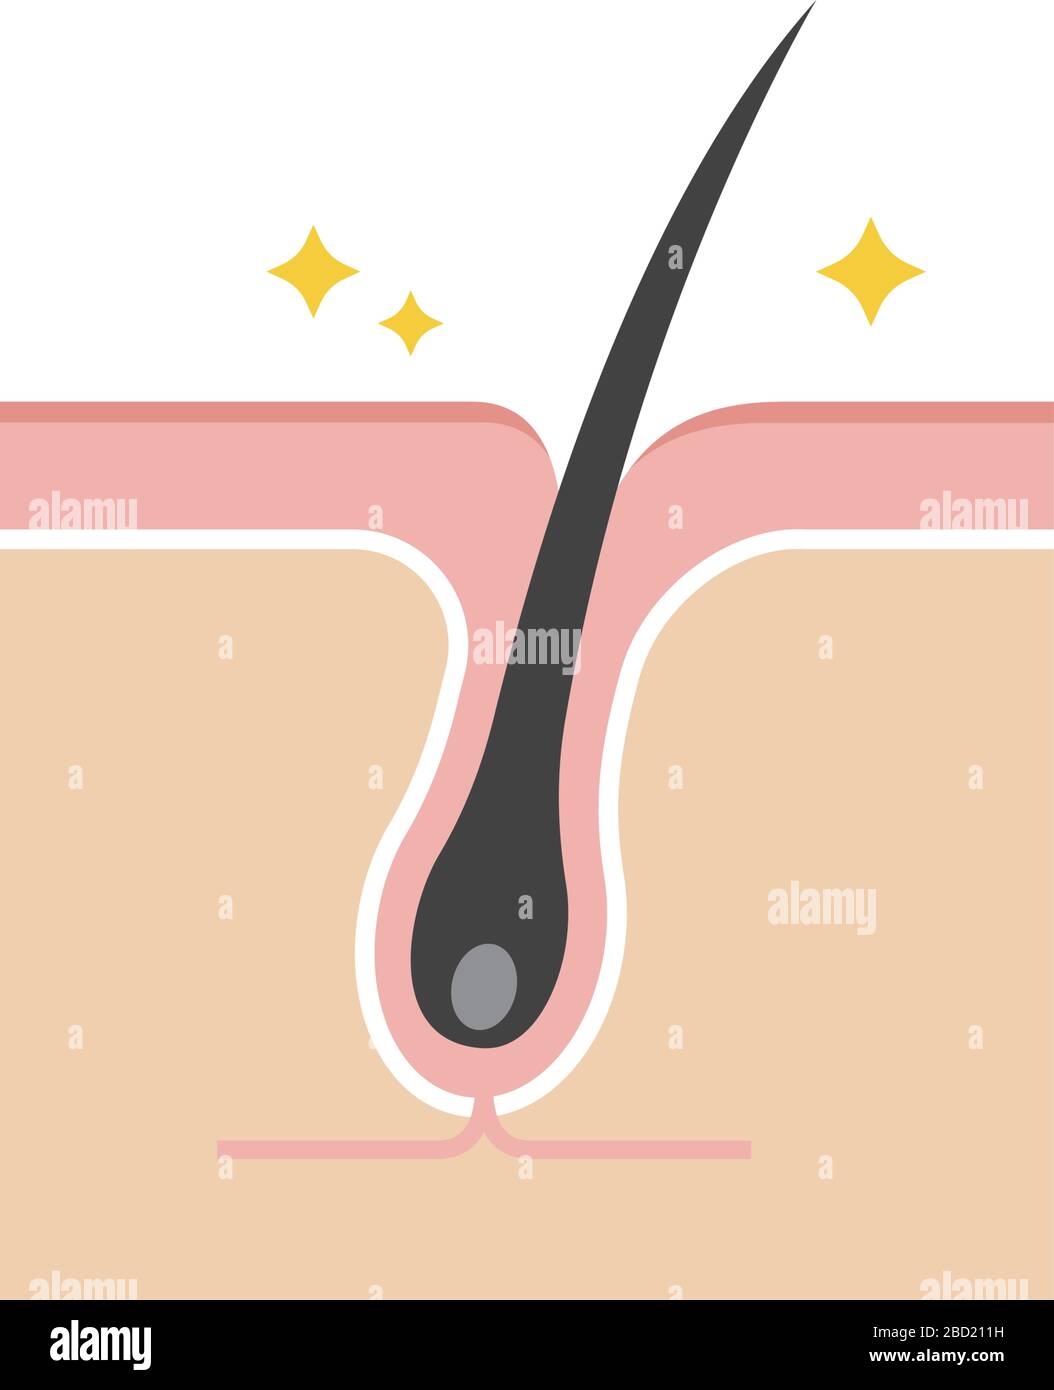 Structure illustration of pores / Clean pore Stock Vector